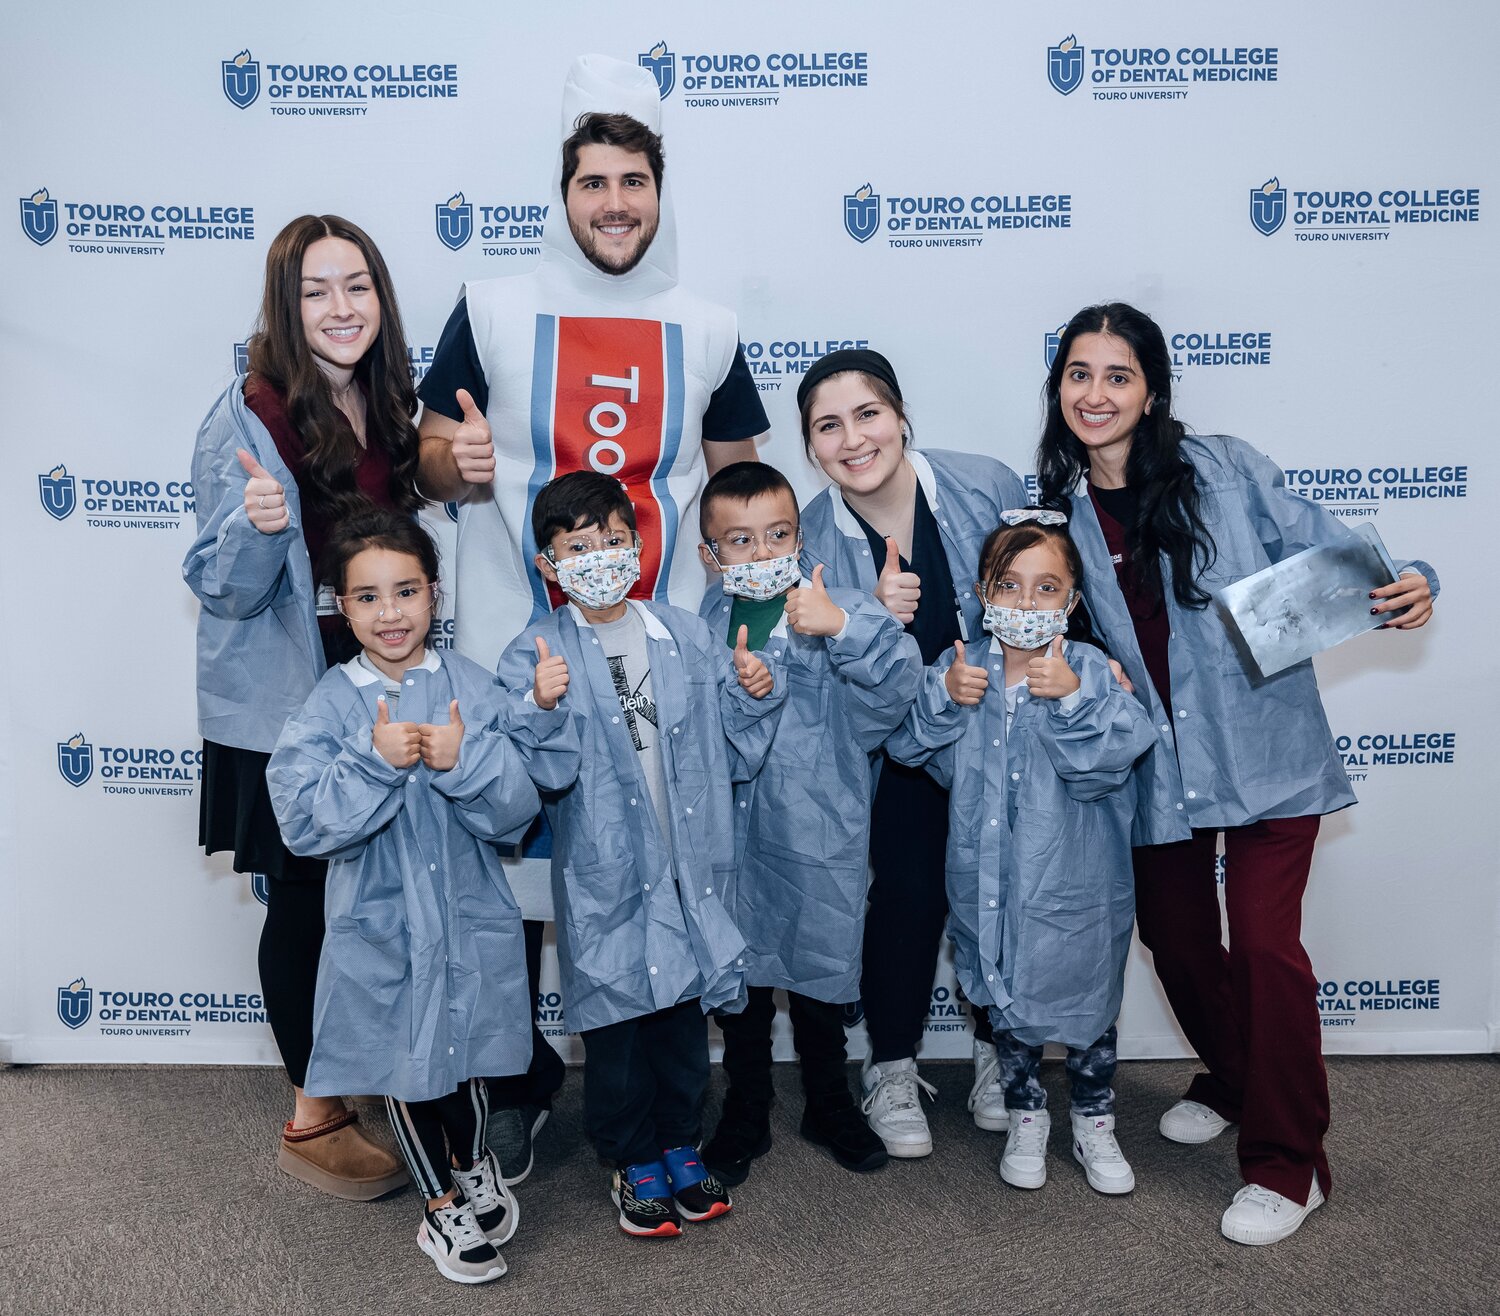 Touro College of Dental Medicine students visited Lawrence kindergarten kids in October. In back from left were Yehudis Friedman, Andrew Polito, Daniela Benzaquen and Shani Levi. In front from left were Victoria Castillo, Caleb Peralta Castro, Angel Cifuentes and Bianca Mazariegos Constanza.